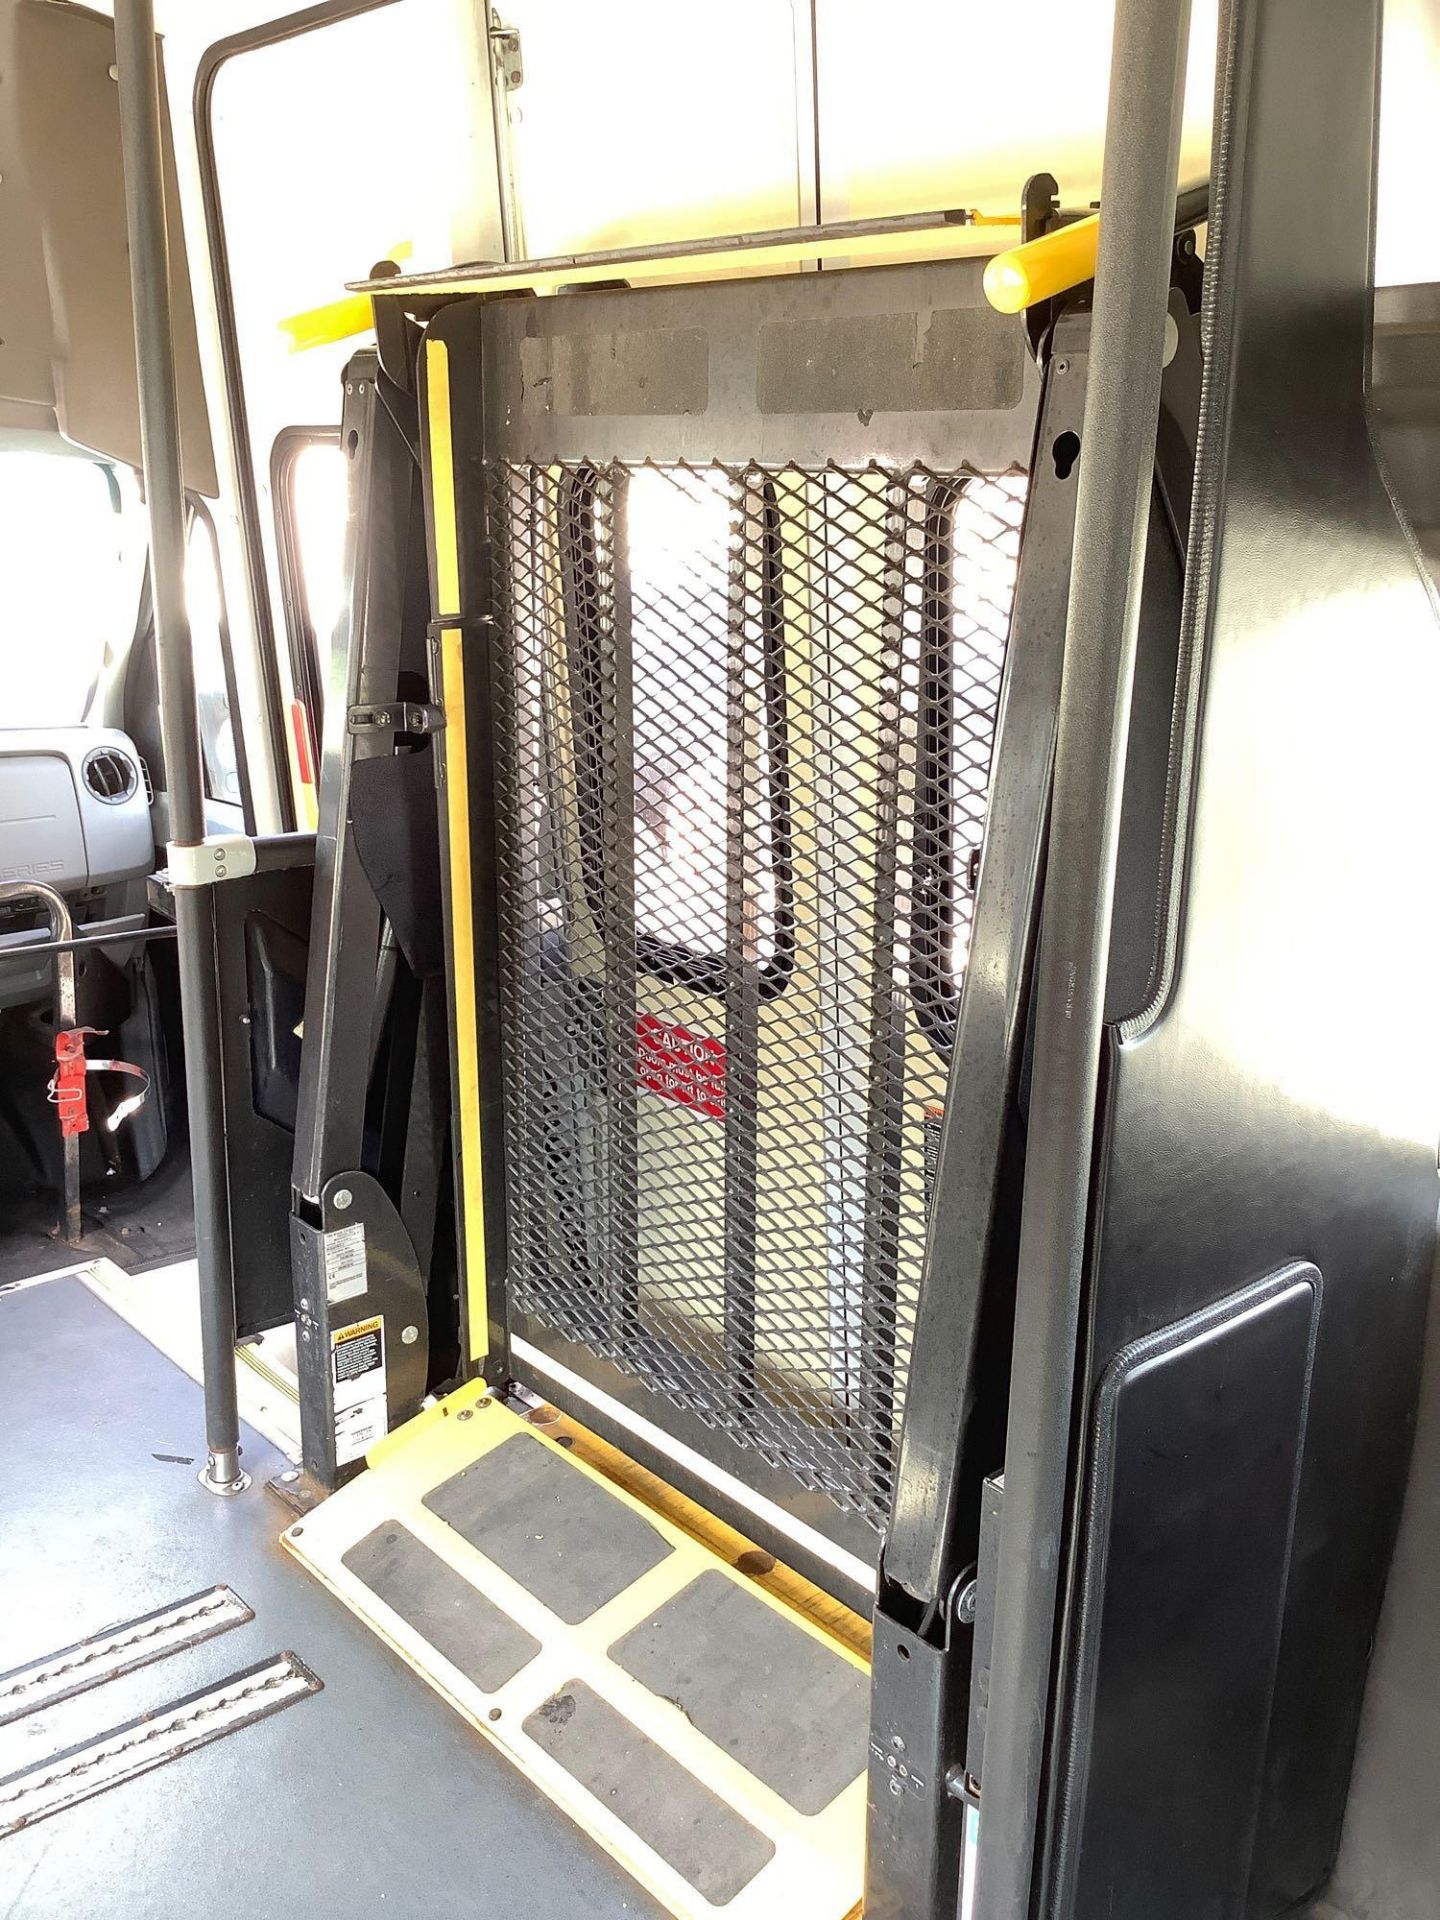 2014 FORD ECONOLINE E-350 SUPER DUTY EXTENDED MOBILITY VAN , AUTOMATIC, AC/ HEAT AIR COND - Image 31 of 36